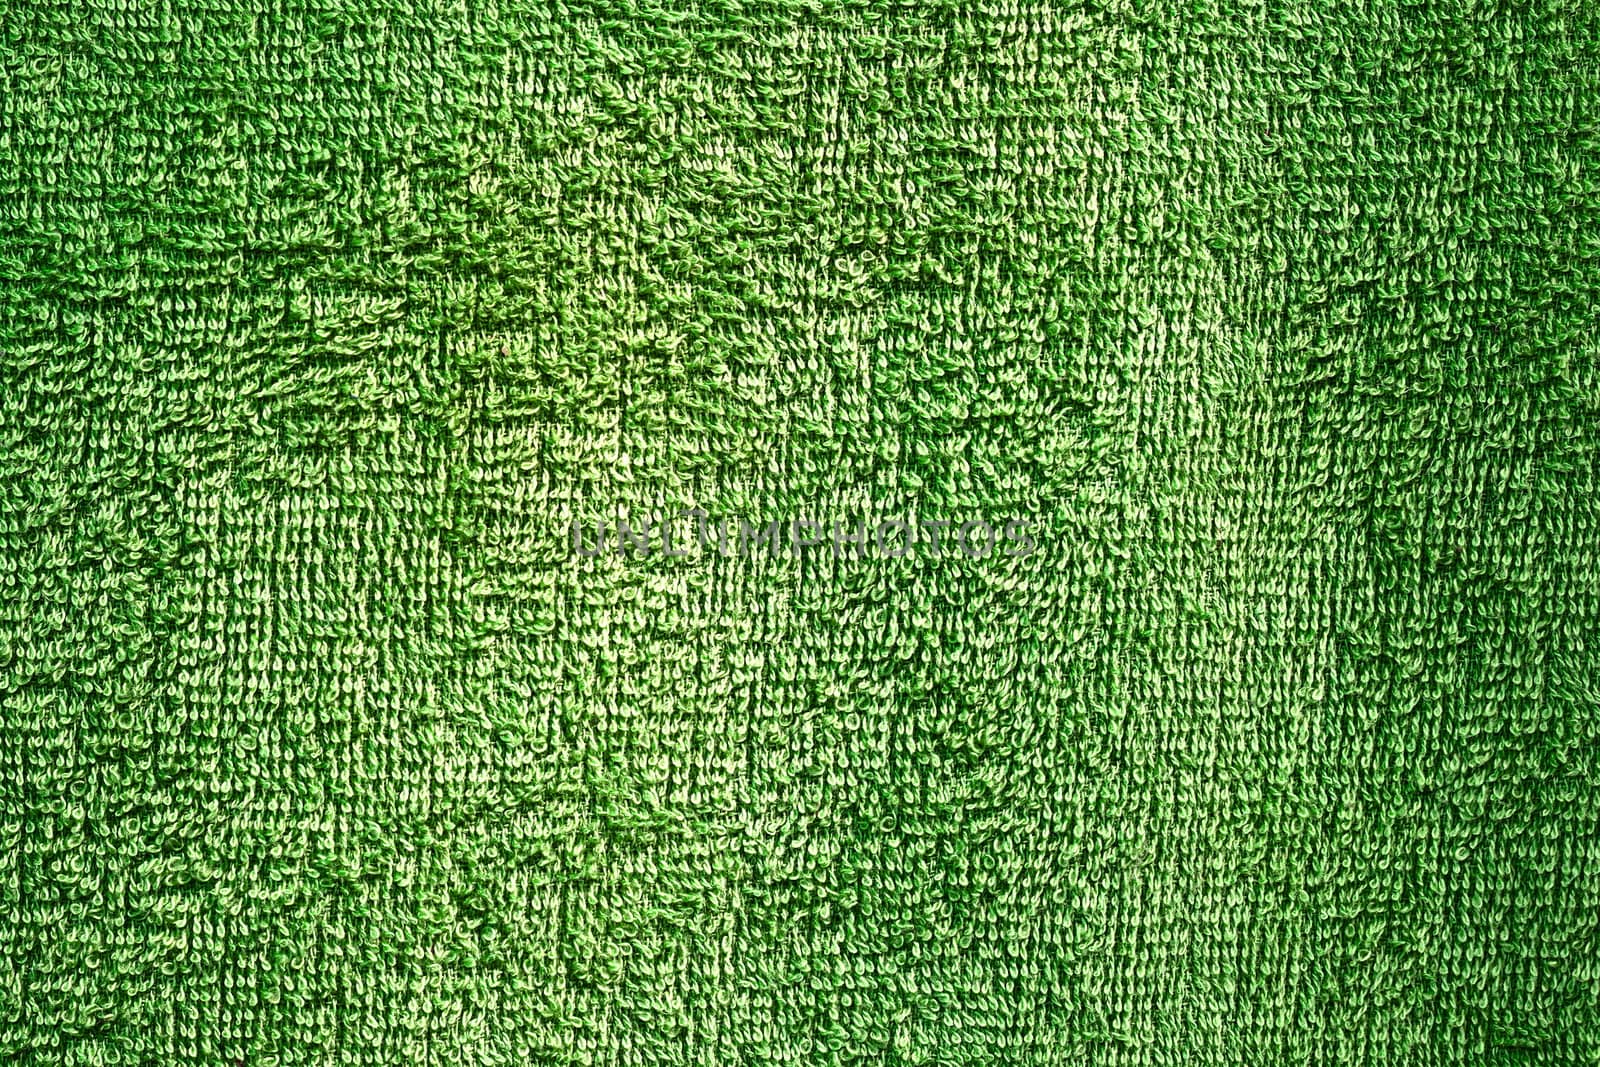 green texture on towel material by taviphoto